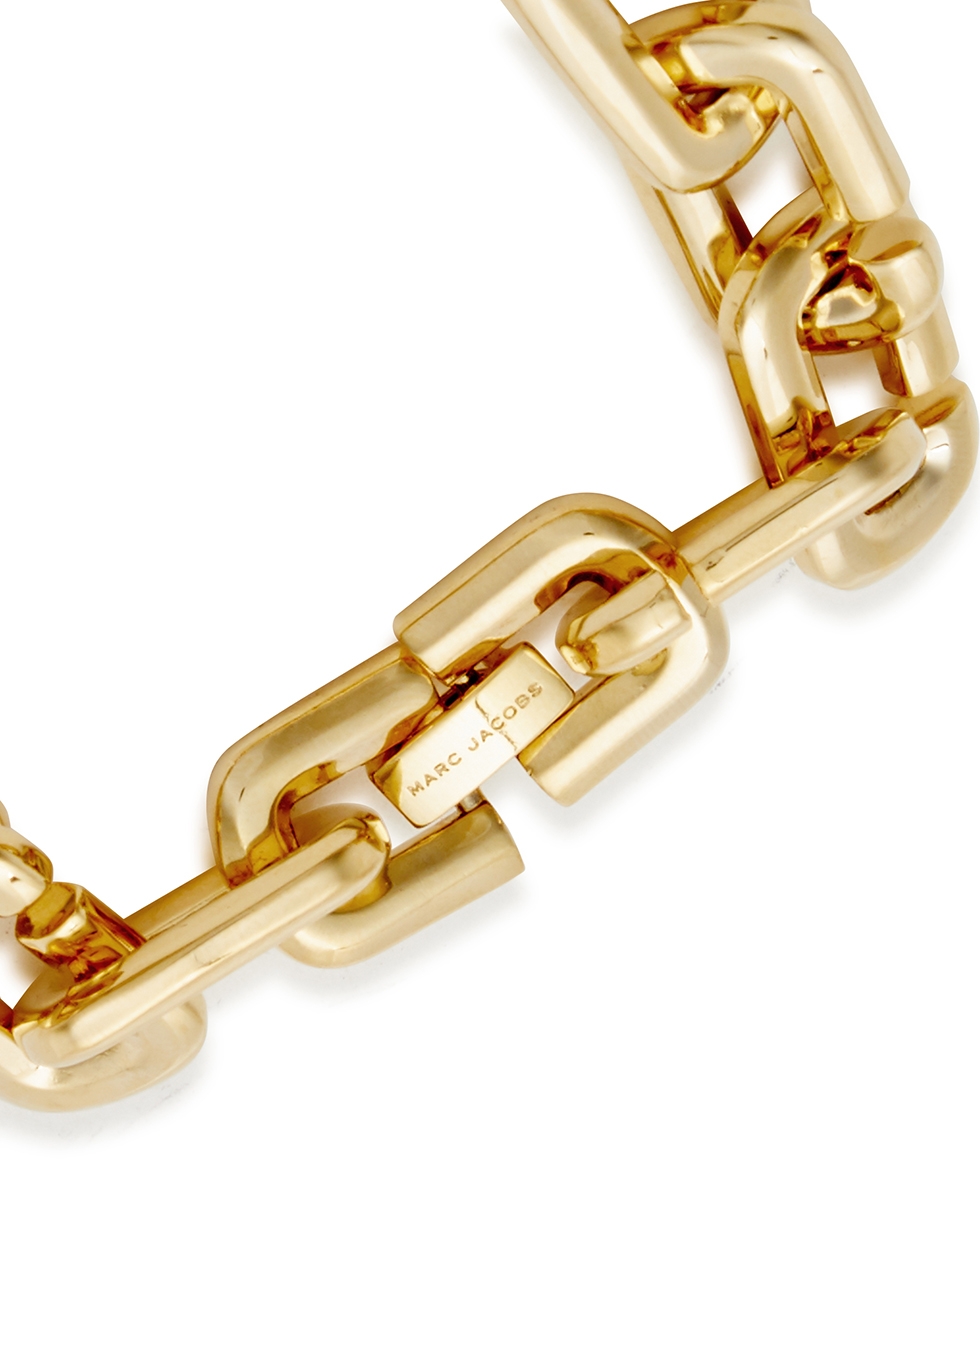 Bracelet Marc by Marc Jacobs Gold in Chain  22661050